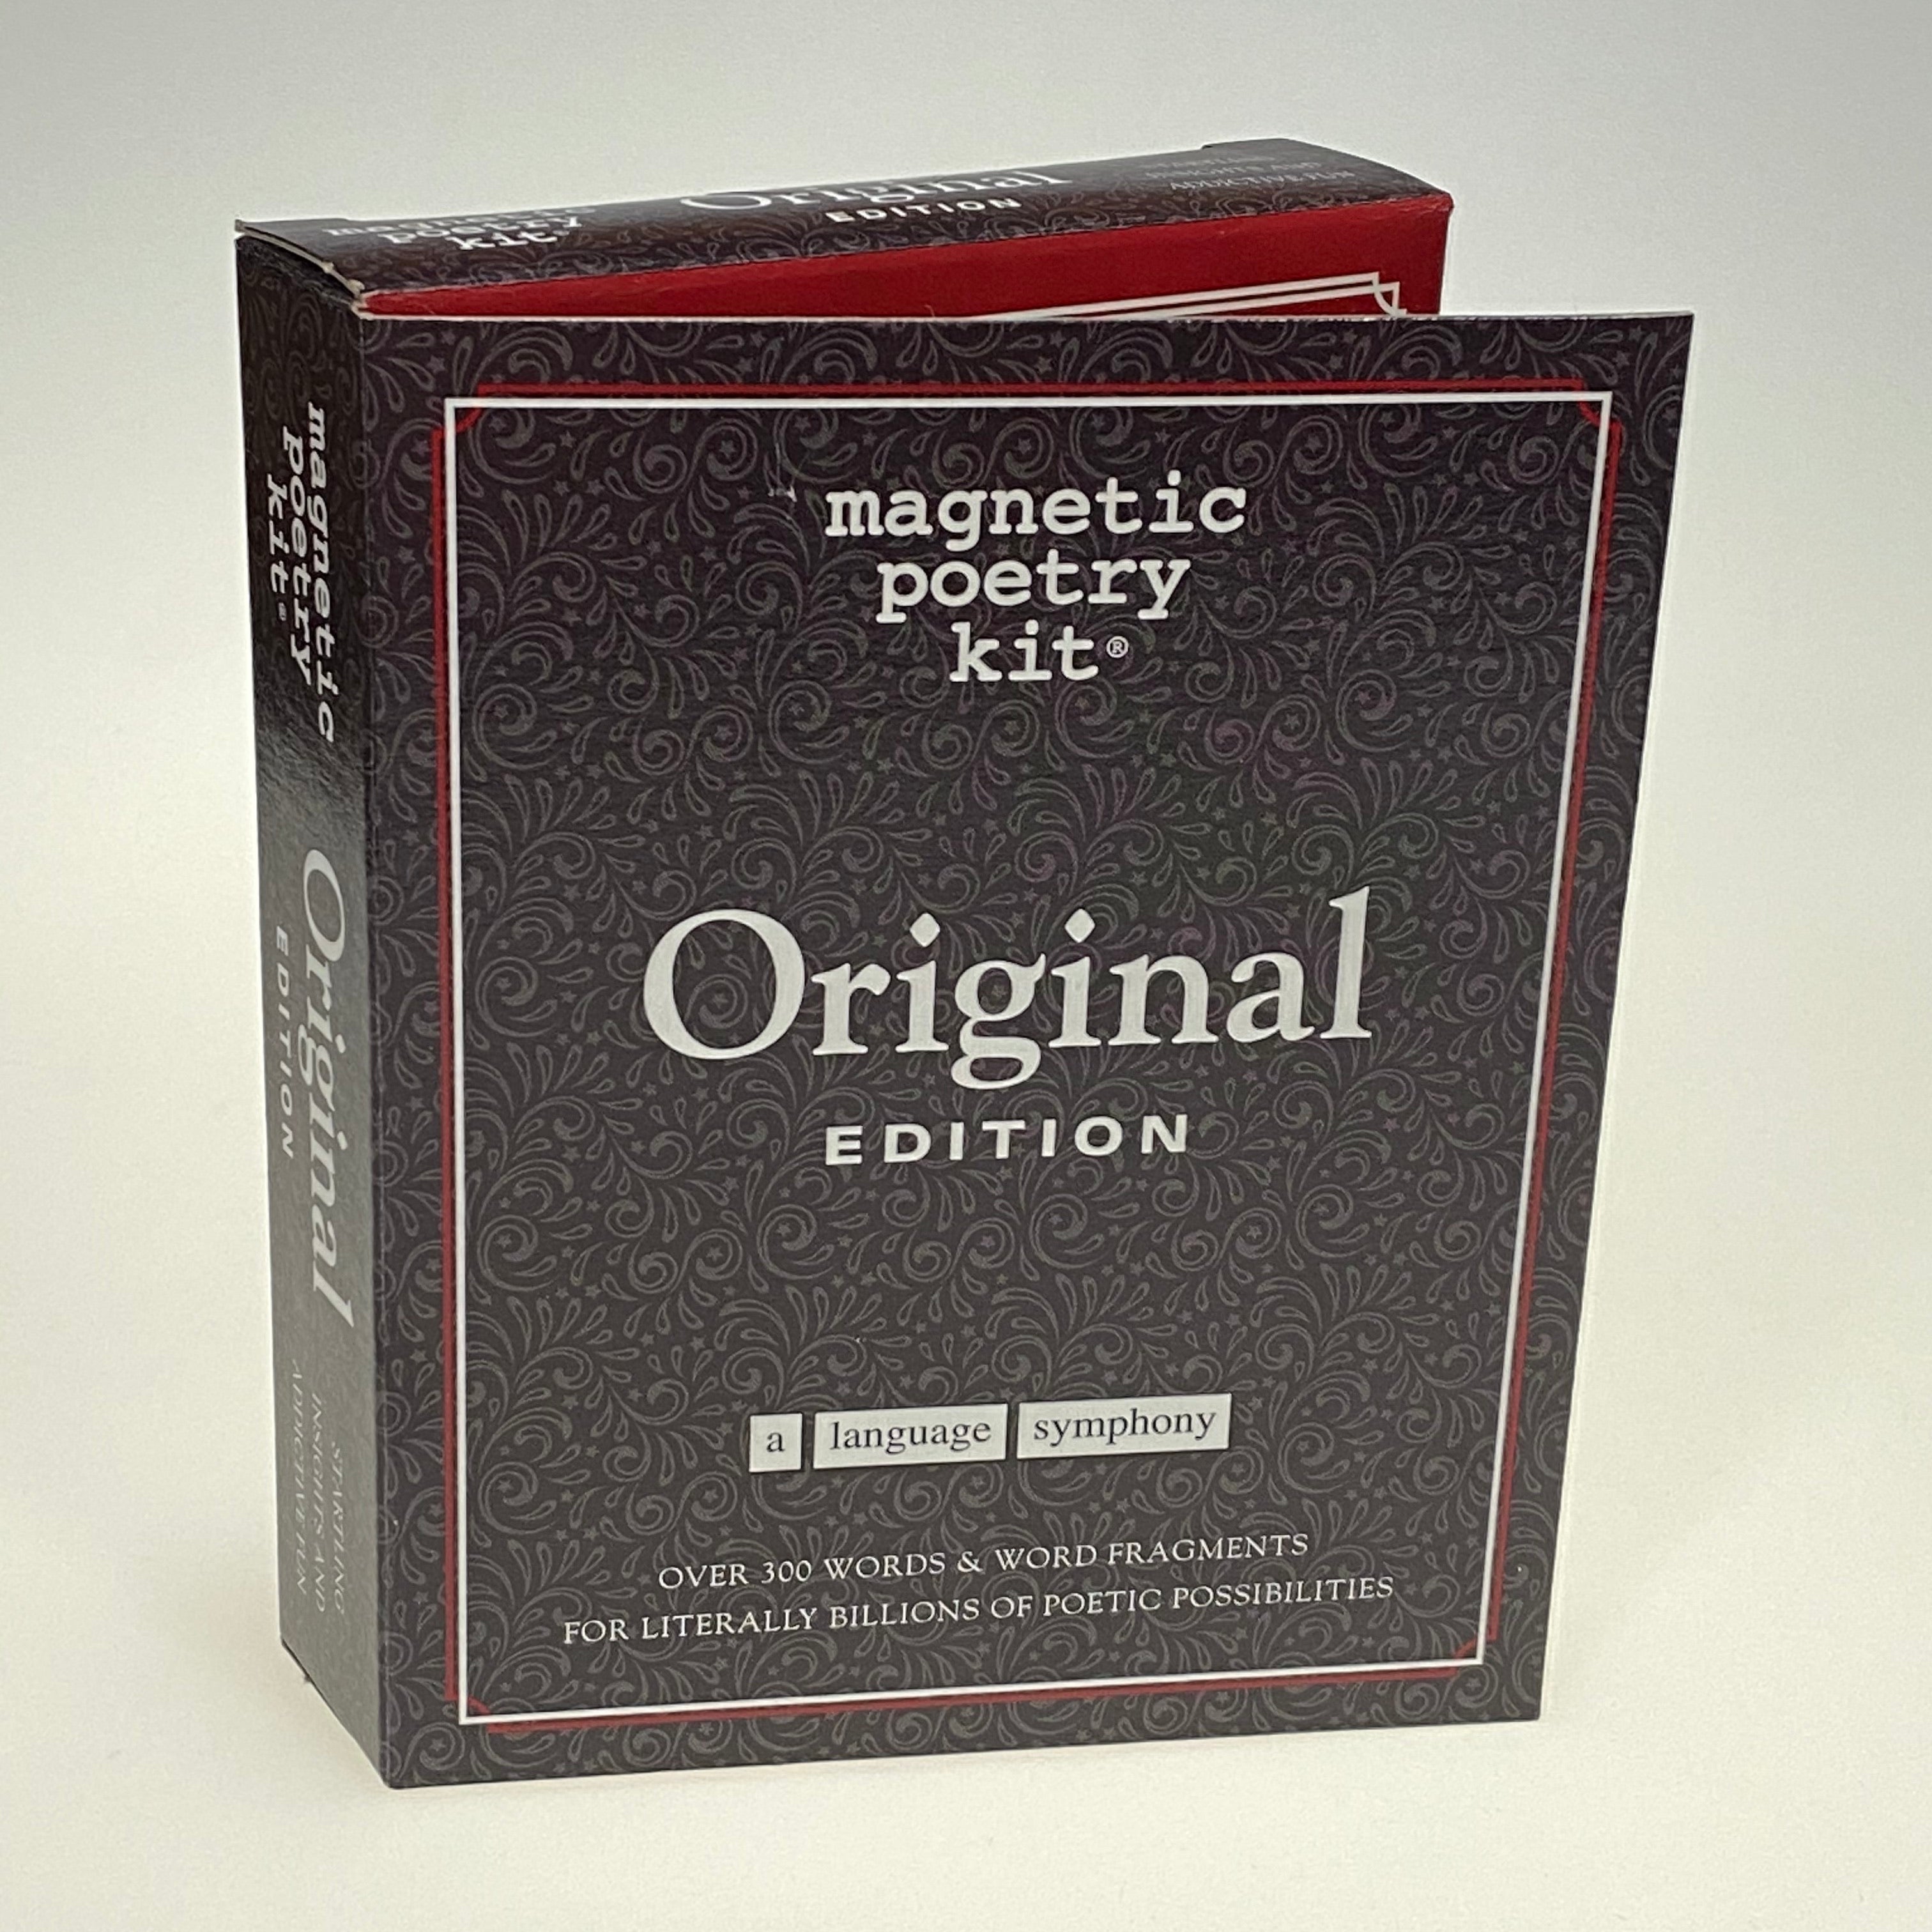 Magnetic Poetry Kit - Original Edition    